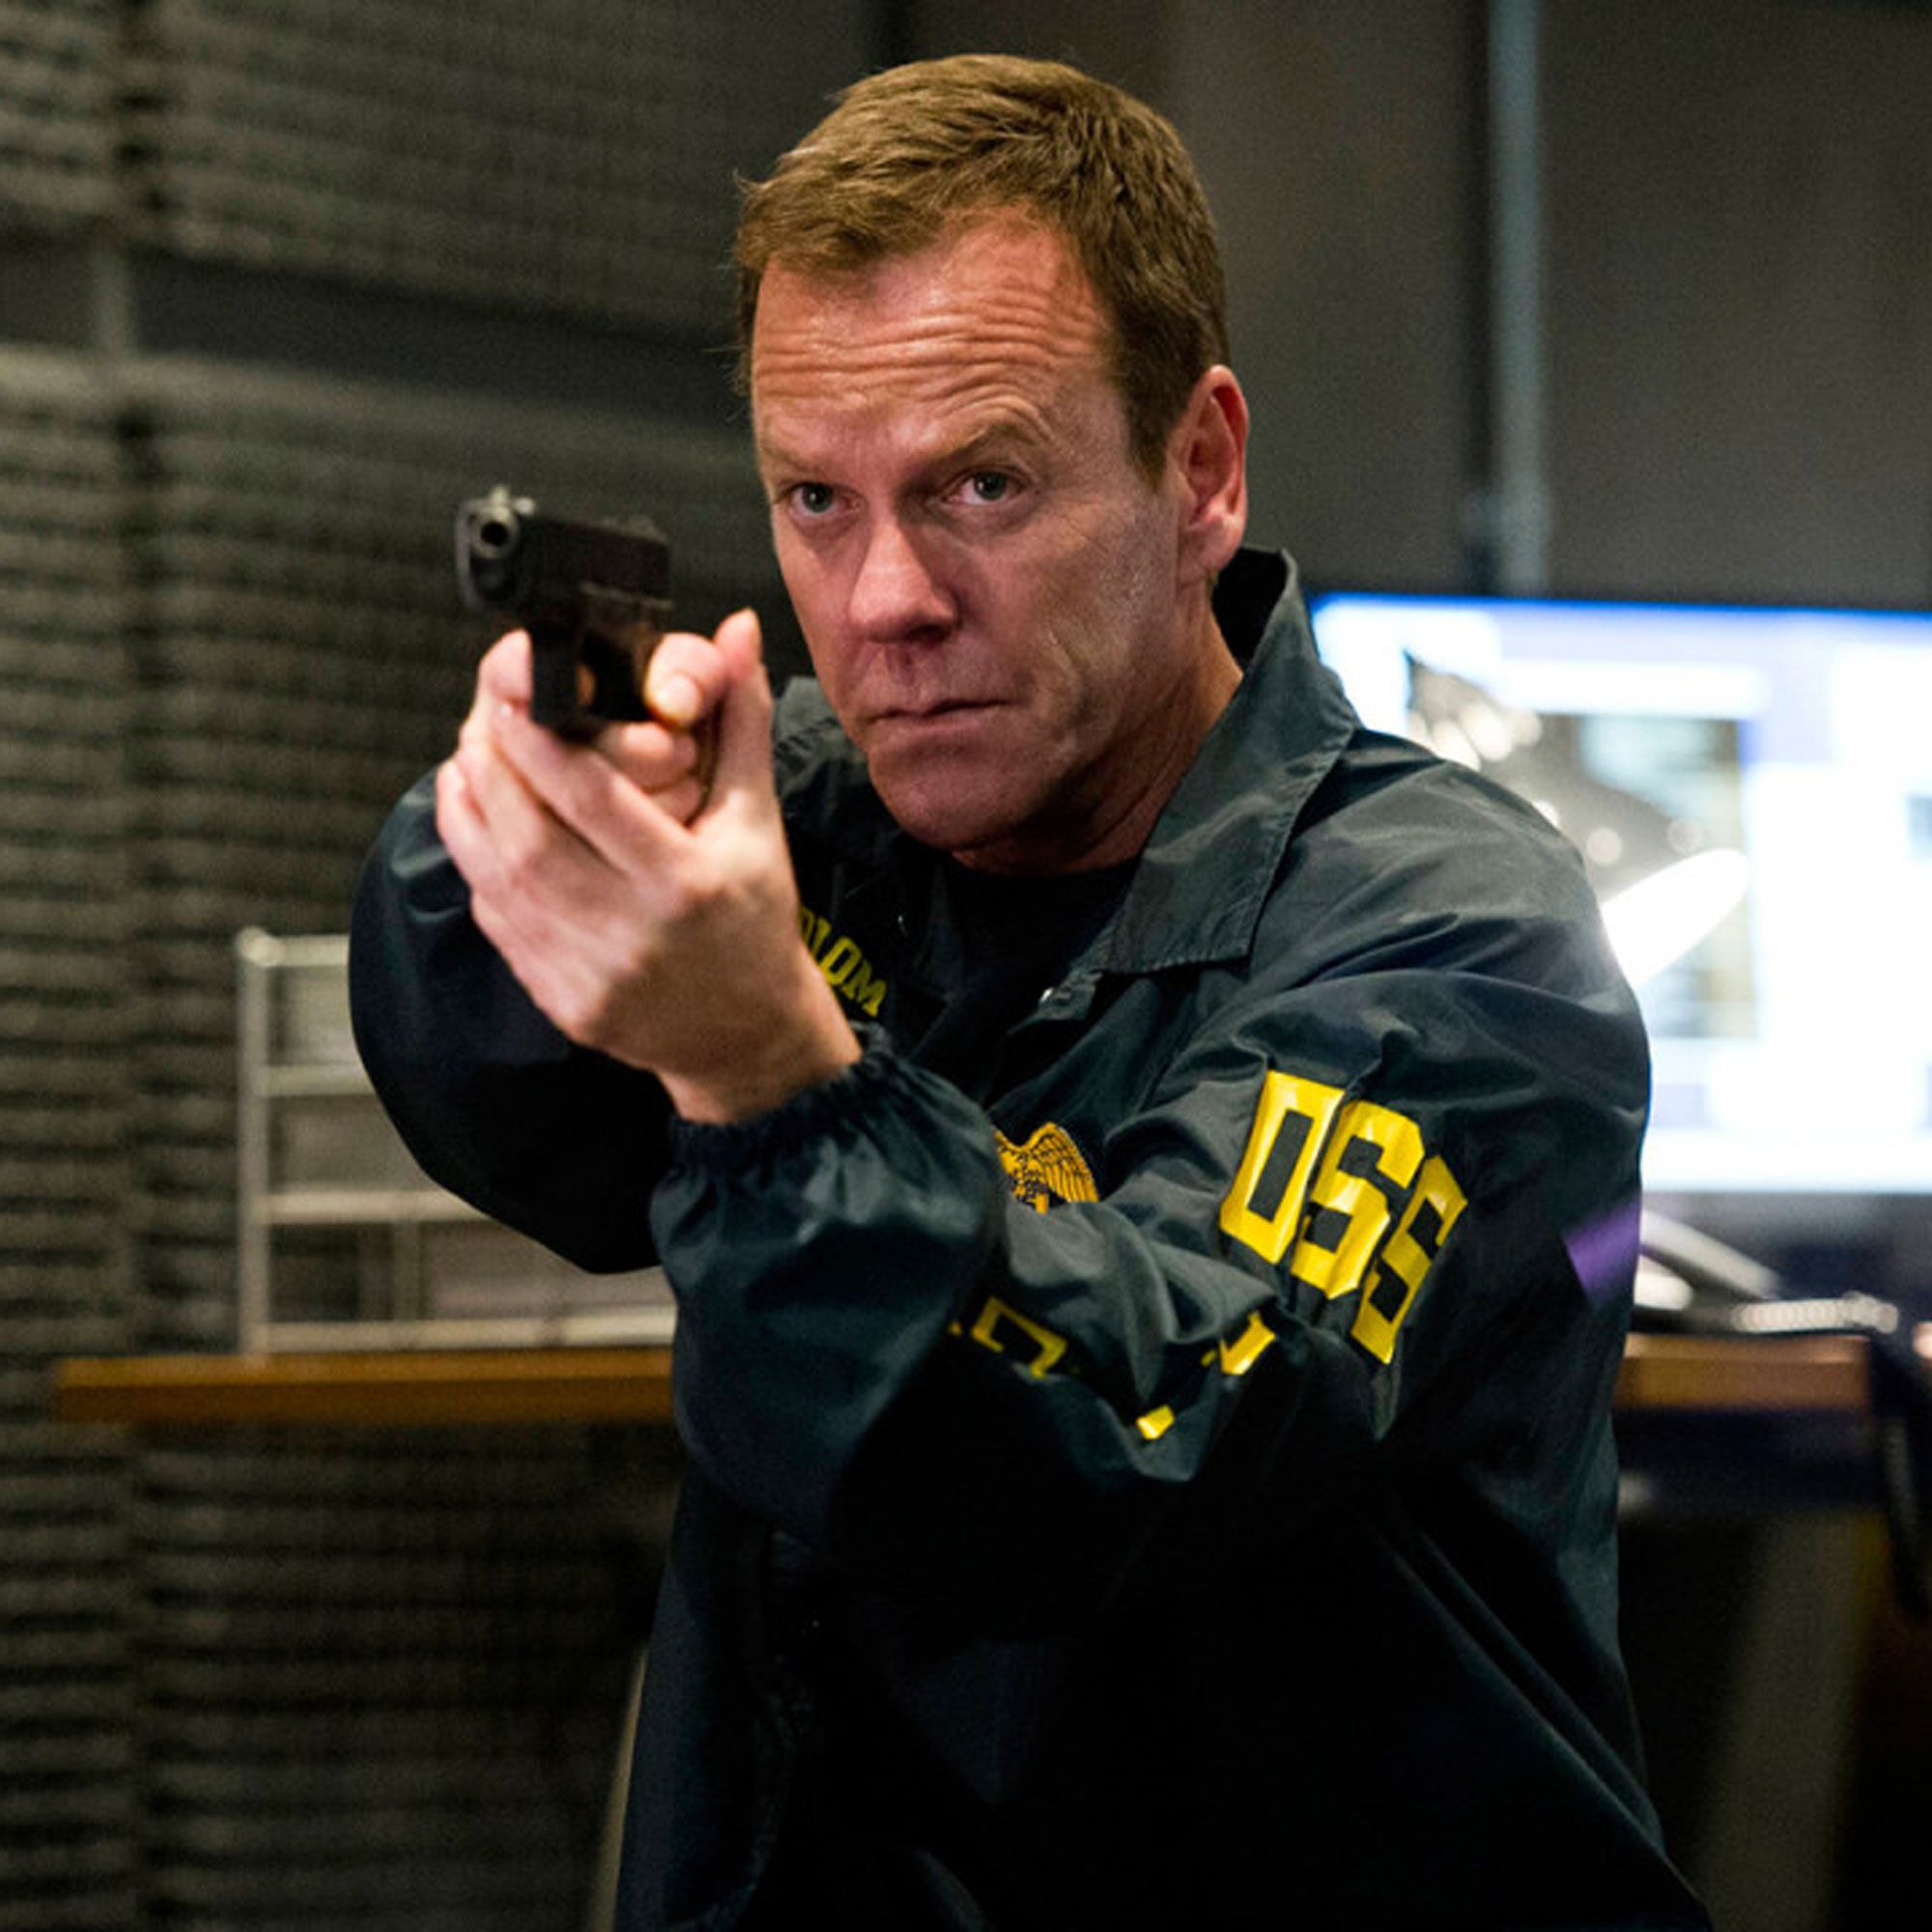 24 season 10 cast, release date, plot and will Jack Bauer return?